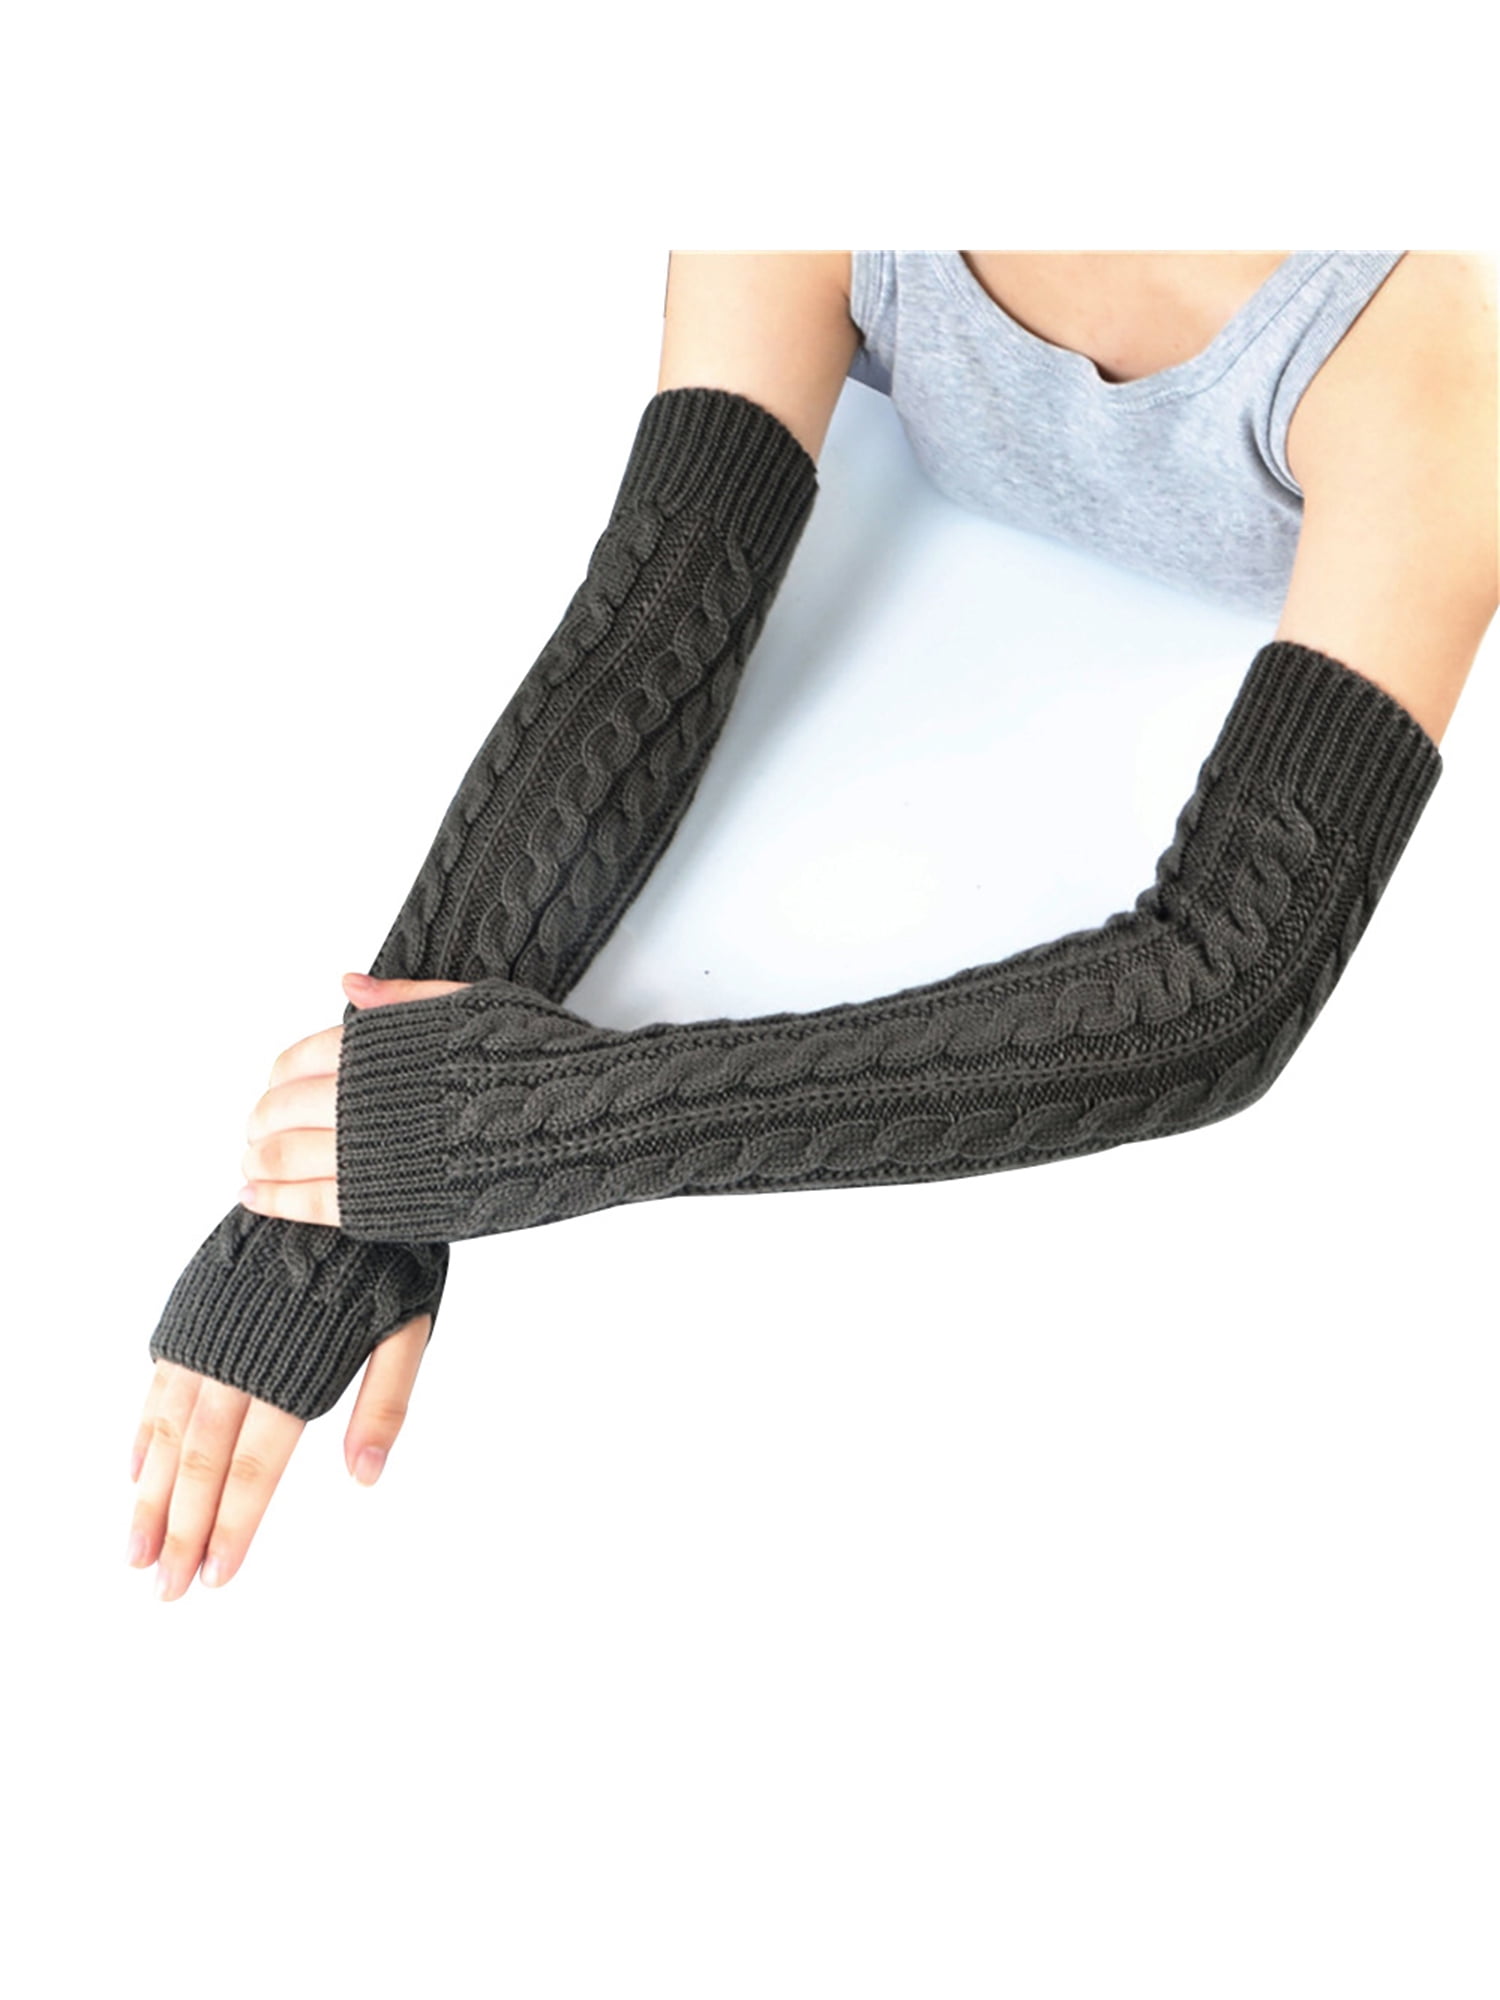 Toimothcn Womens Knit Arm Warmer Gloves Warm Cashmere Long Fingerless Mittens with Thumb Hole 